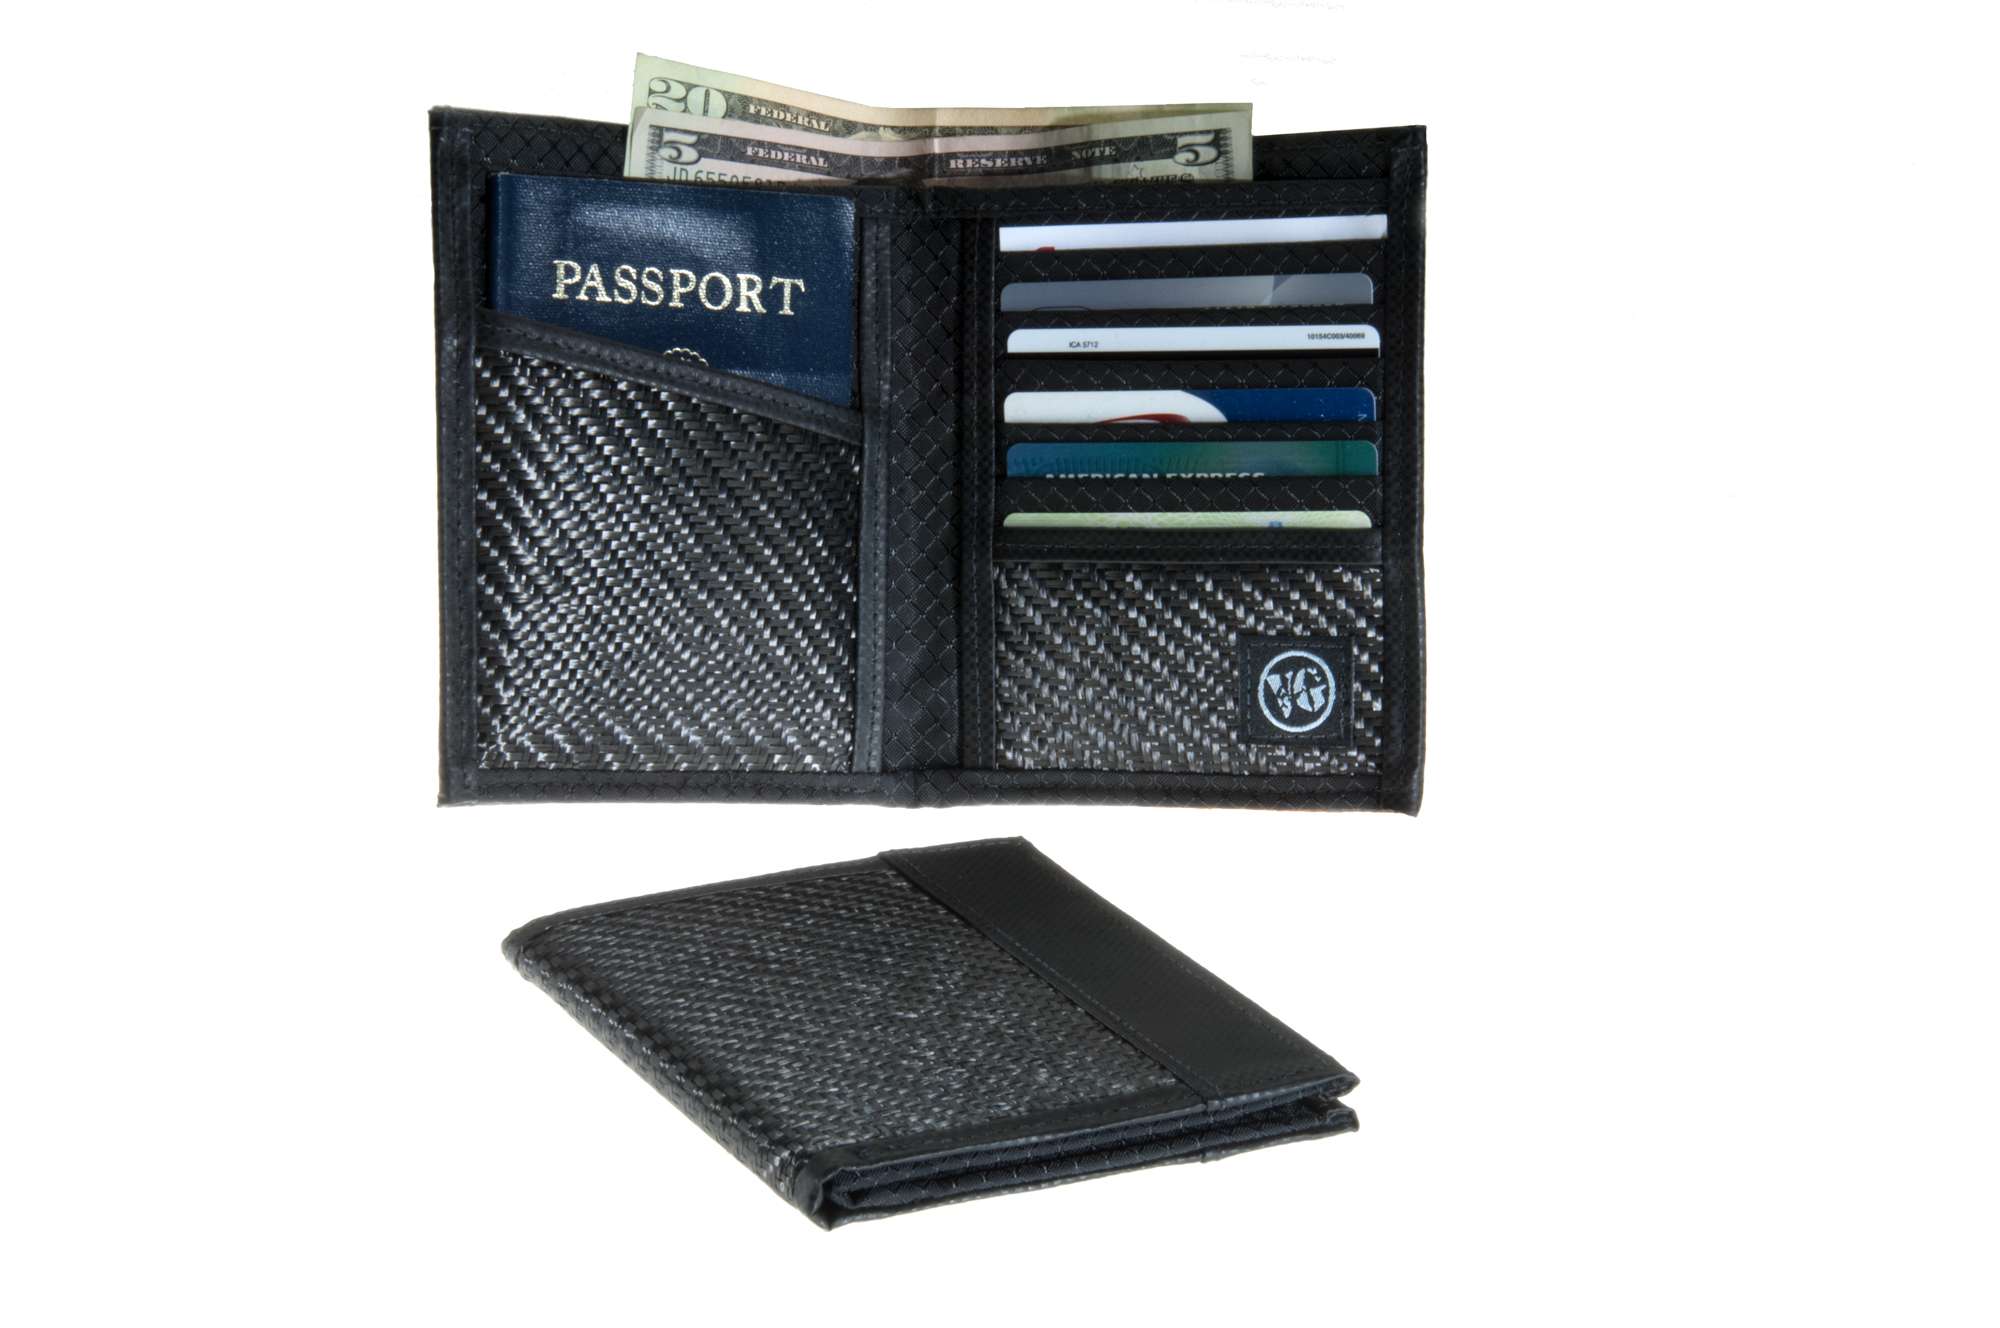 CarbonFit® Carbon Fiber RFID ARMOR Passport Wallet – Made in the USA by VIATOR GEAR - TeamDI